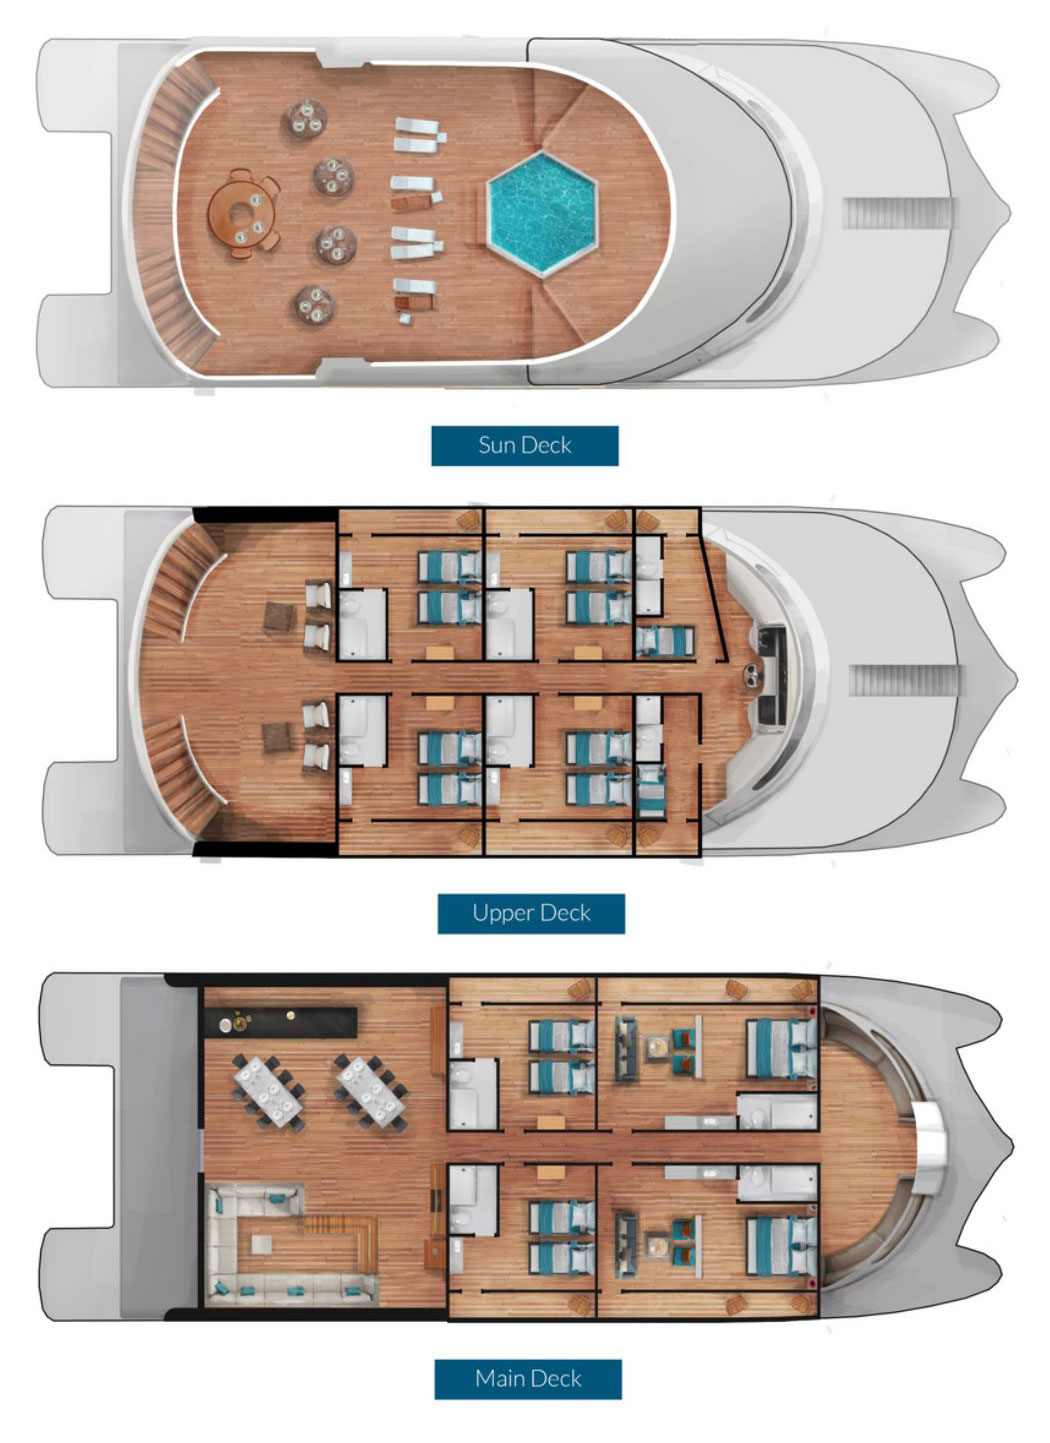 Deck plan of Petrel boat in Galapagos with 3 passenger decks, 2 double occupancy suites, 6 double occupancy cabins & 1 single occupancy cabin.